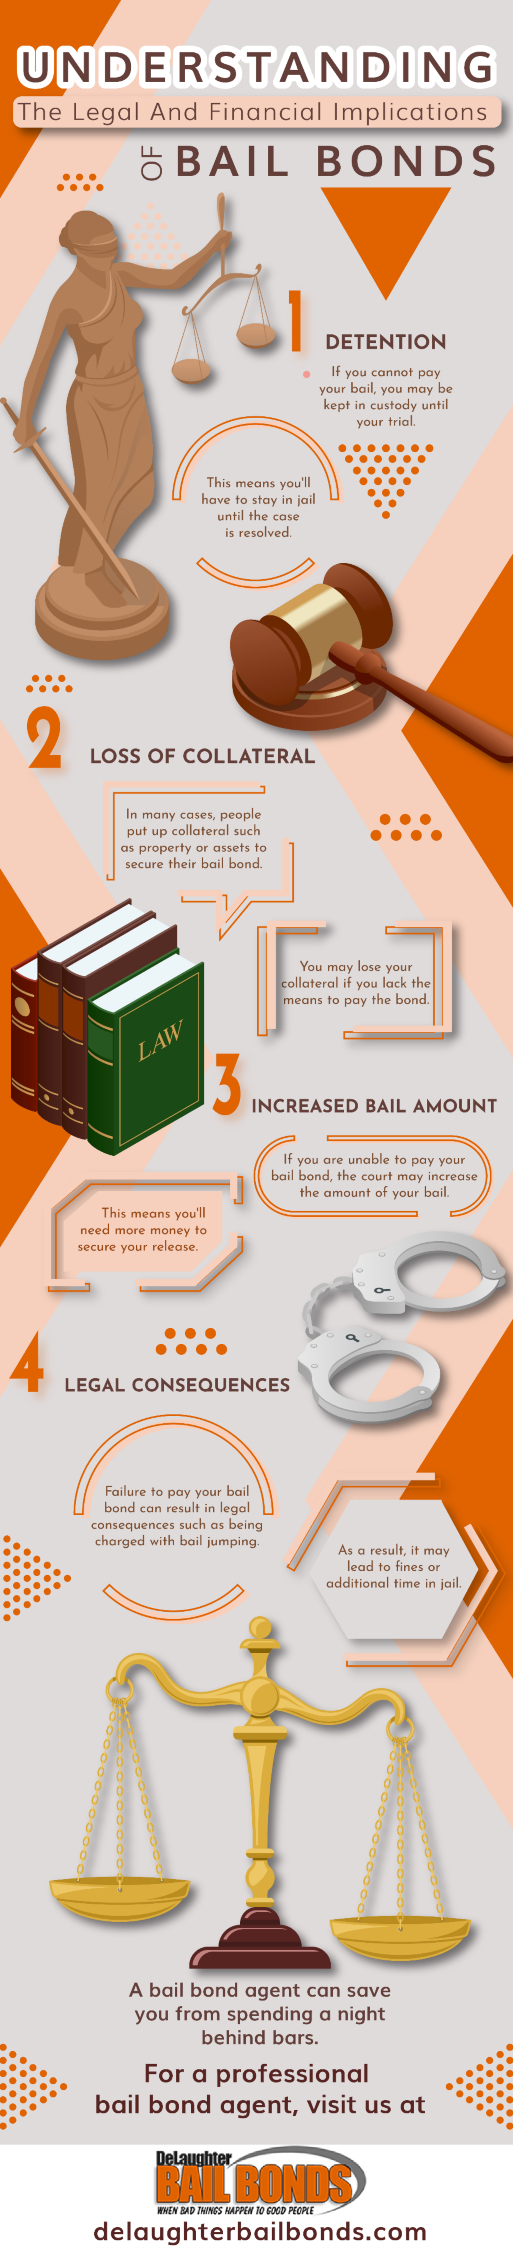 Understanding The Legal And Financial Implications Of Bail Bond